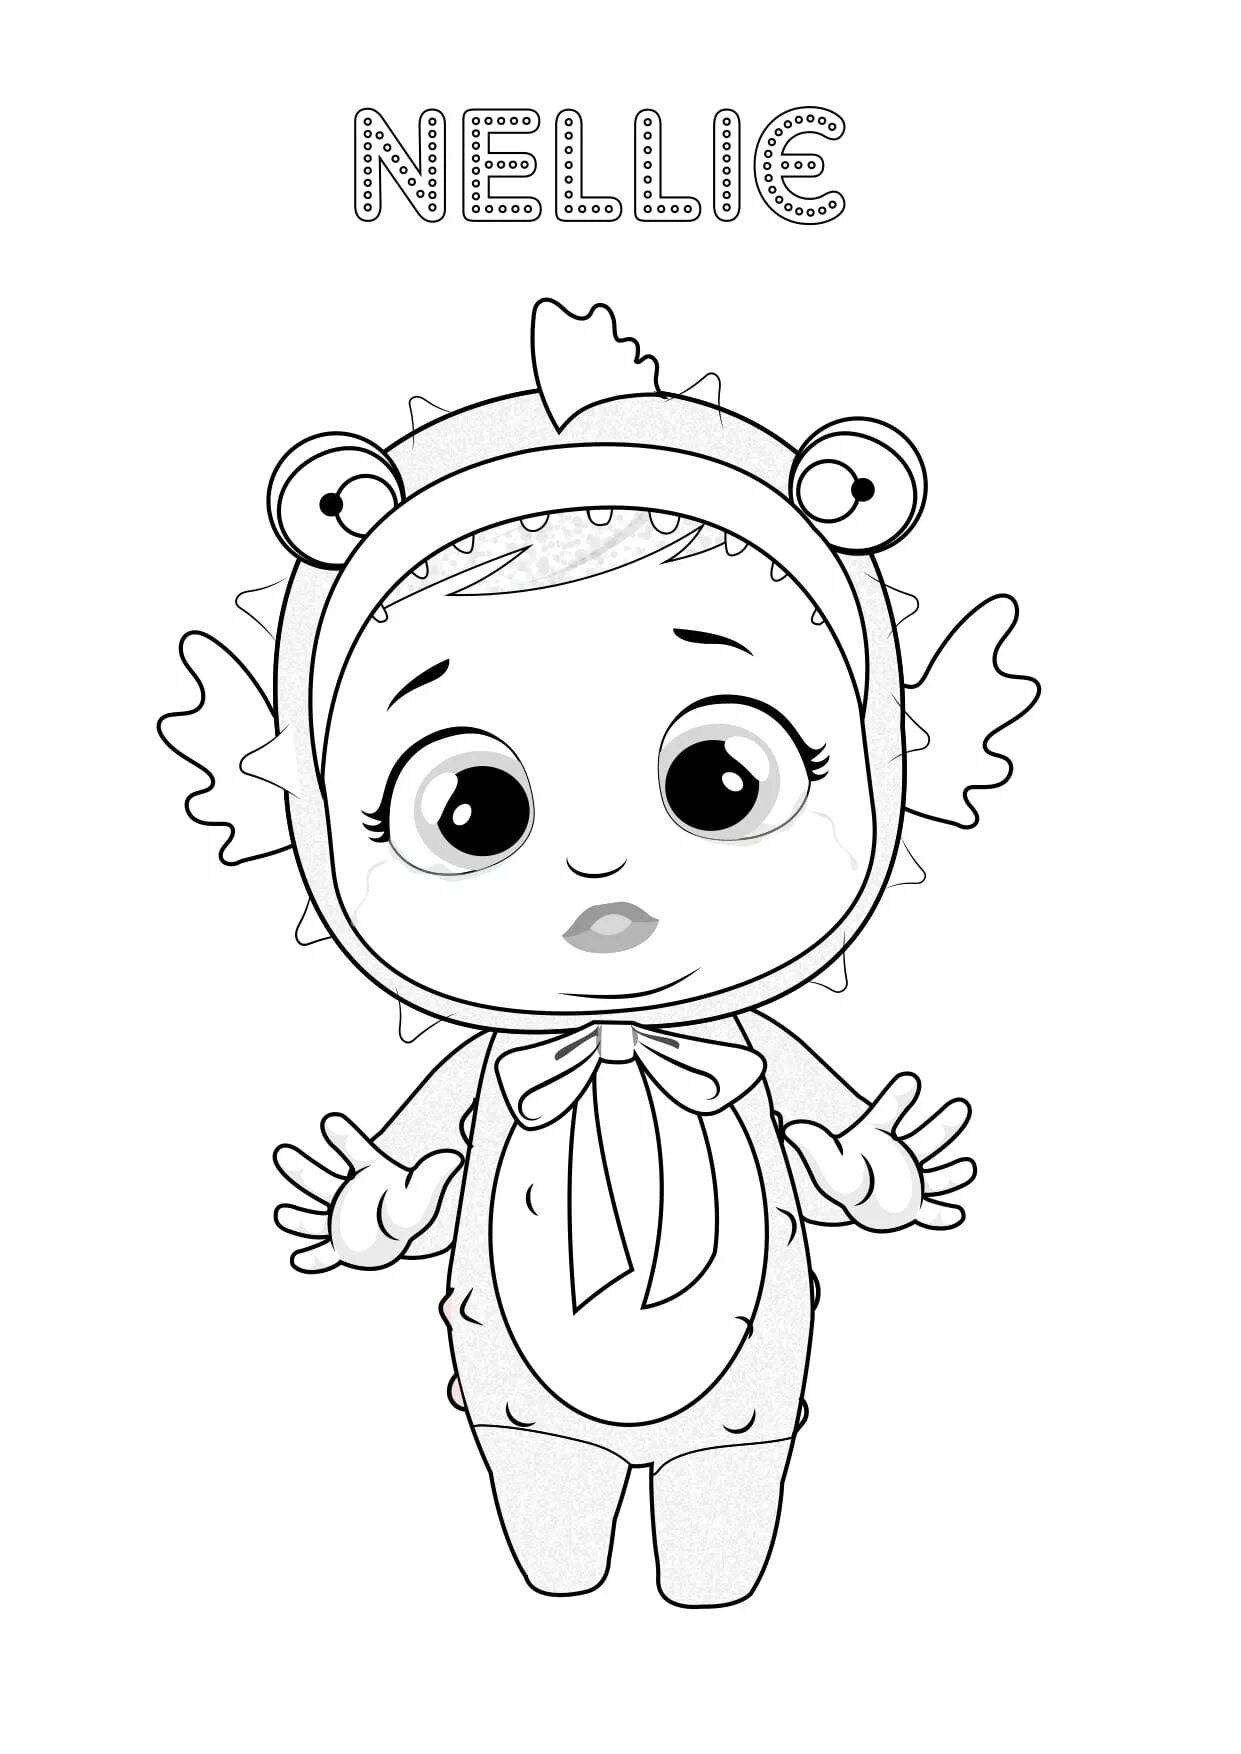 Exalted crybaby coloring book